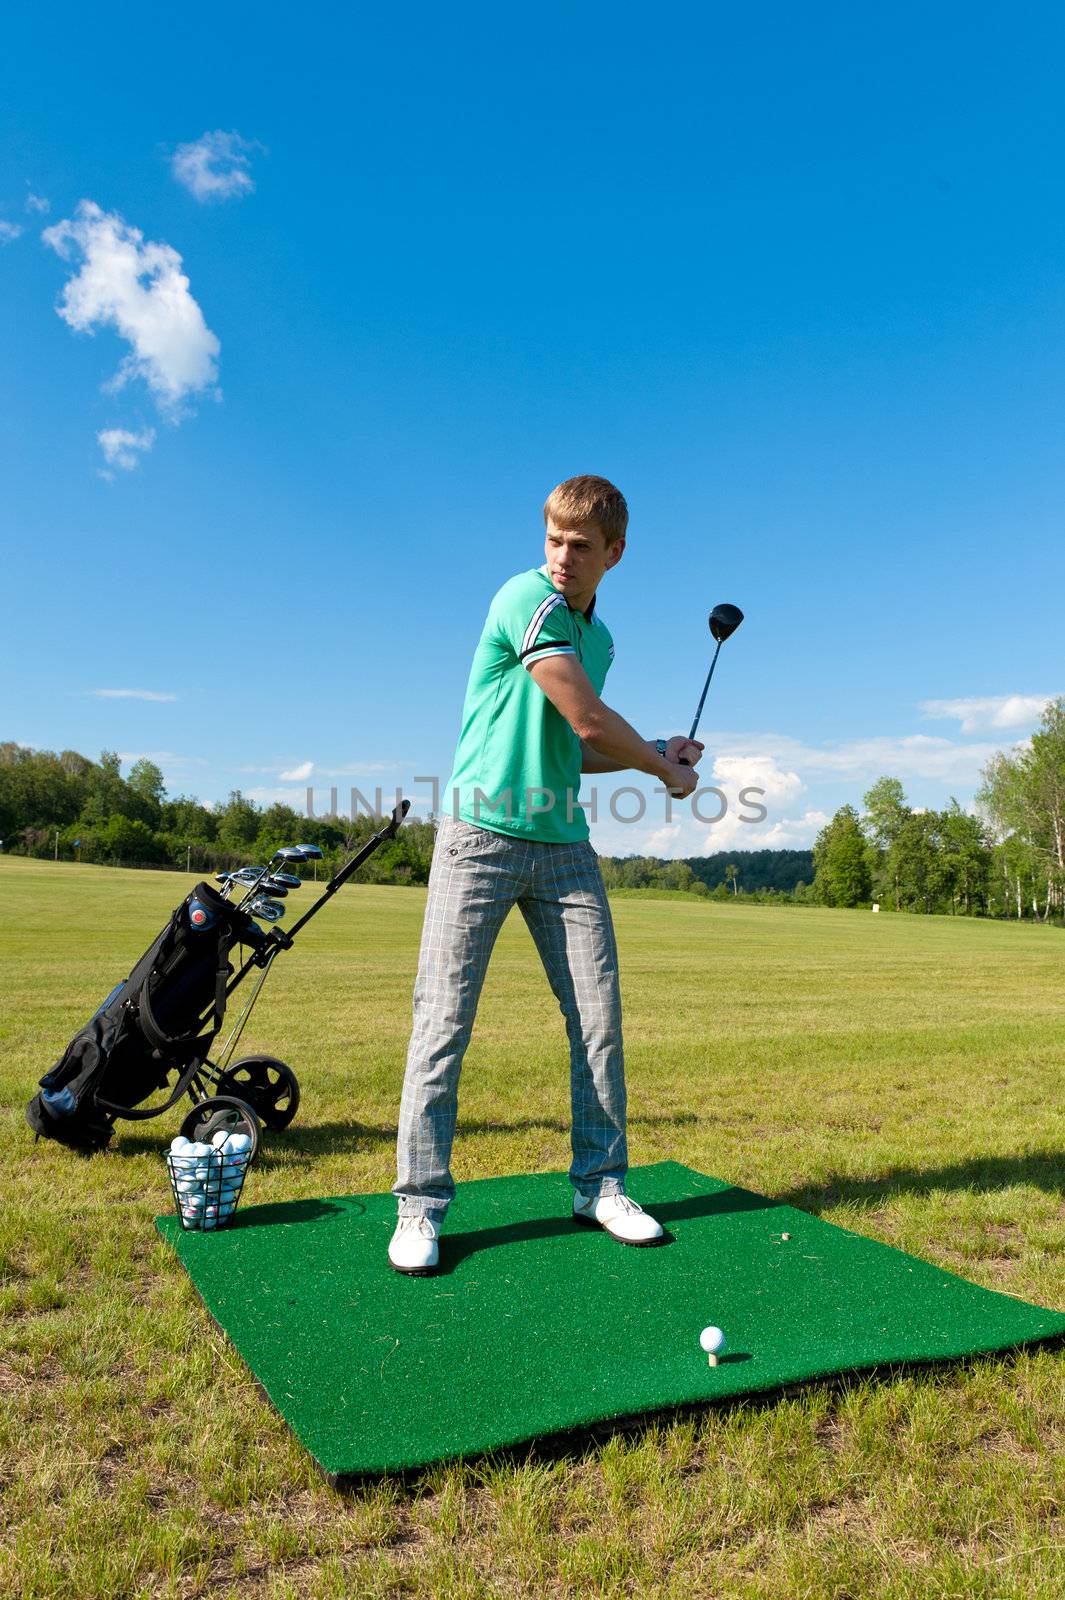 Man about to strike golf ball on green field